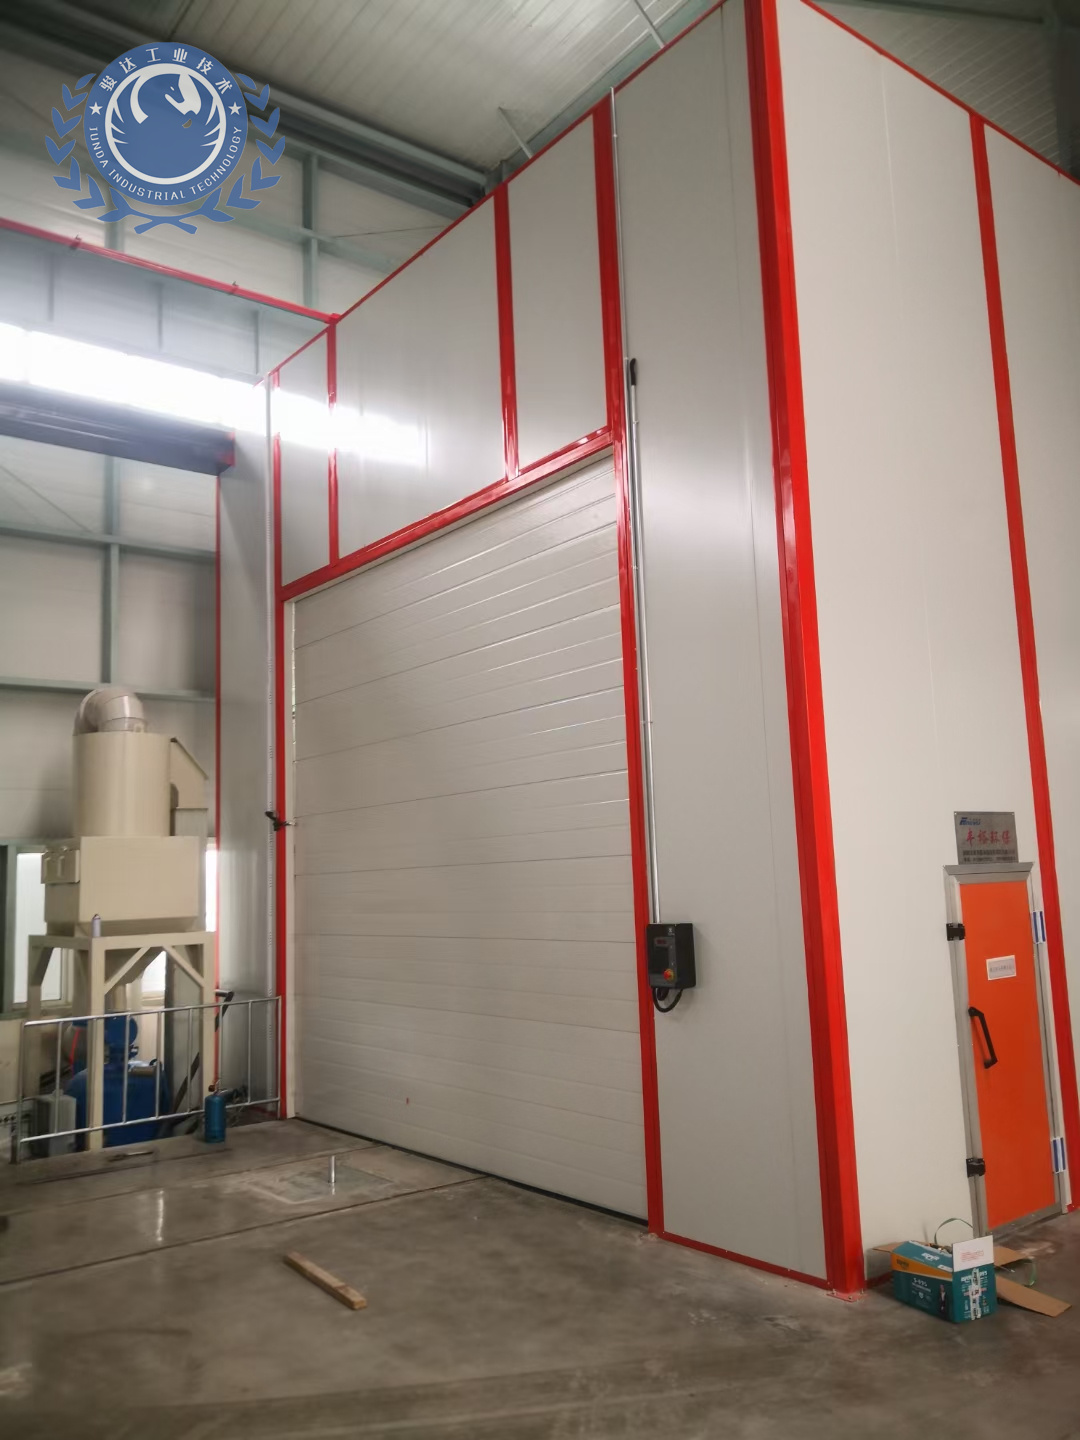 The main structure and function of the sandblasting room part 1